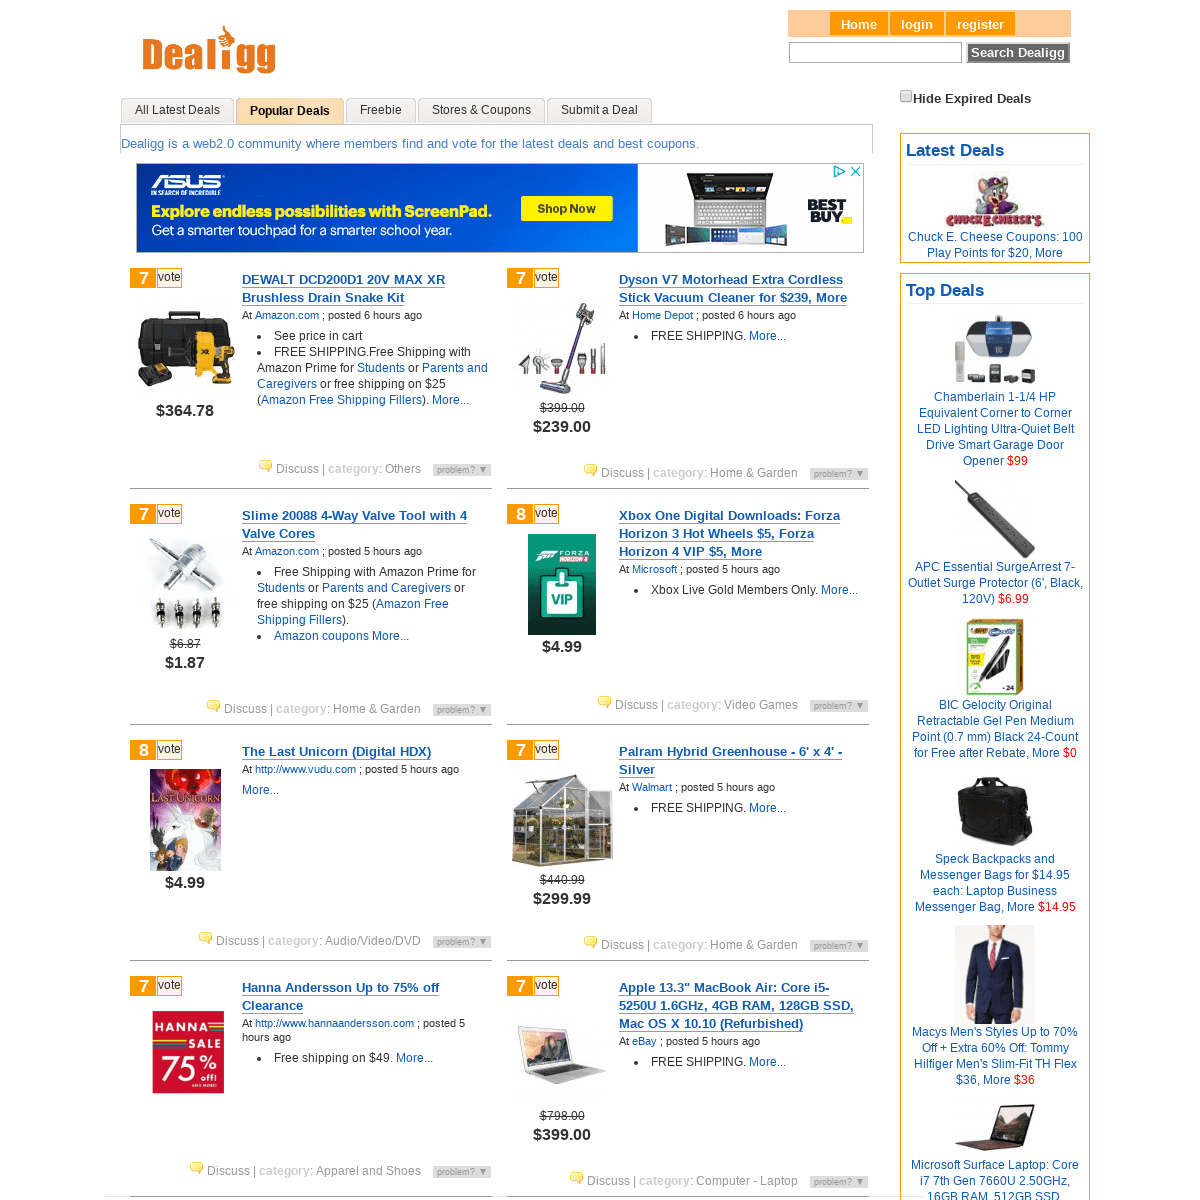 Hot Deals Free Coupons, HP Coupons, Dell, Lenovo, Buy.com Promotion Codes and More!